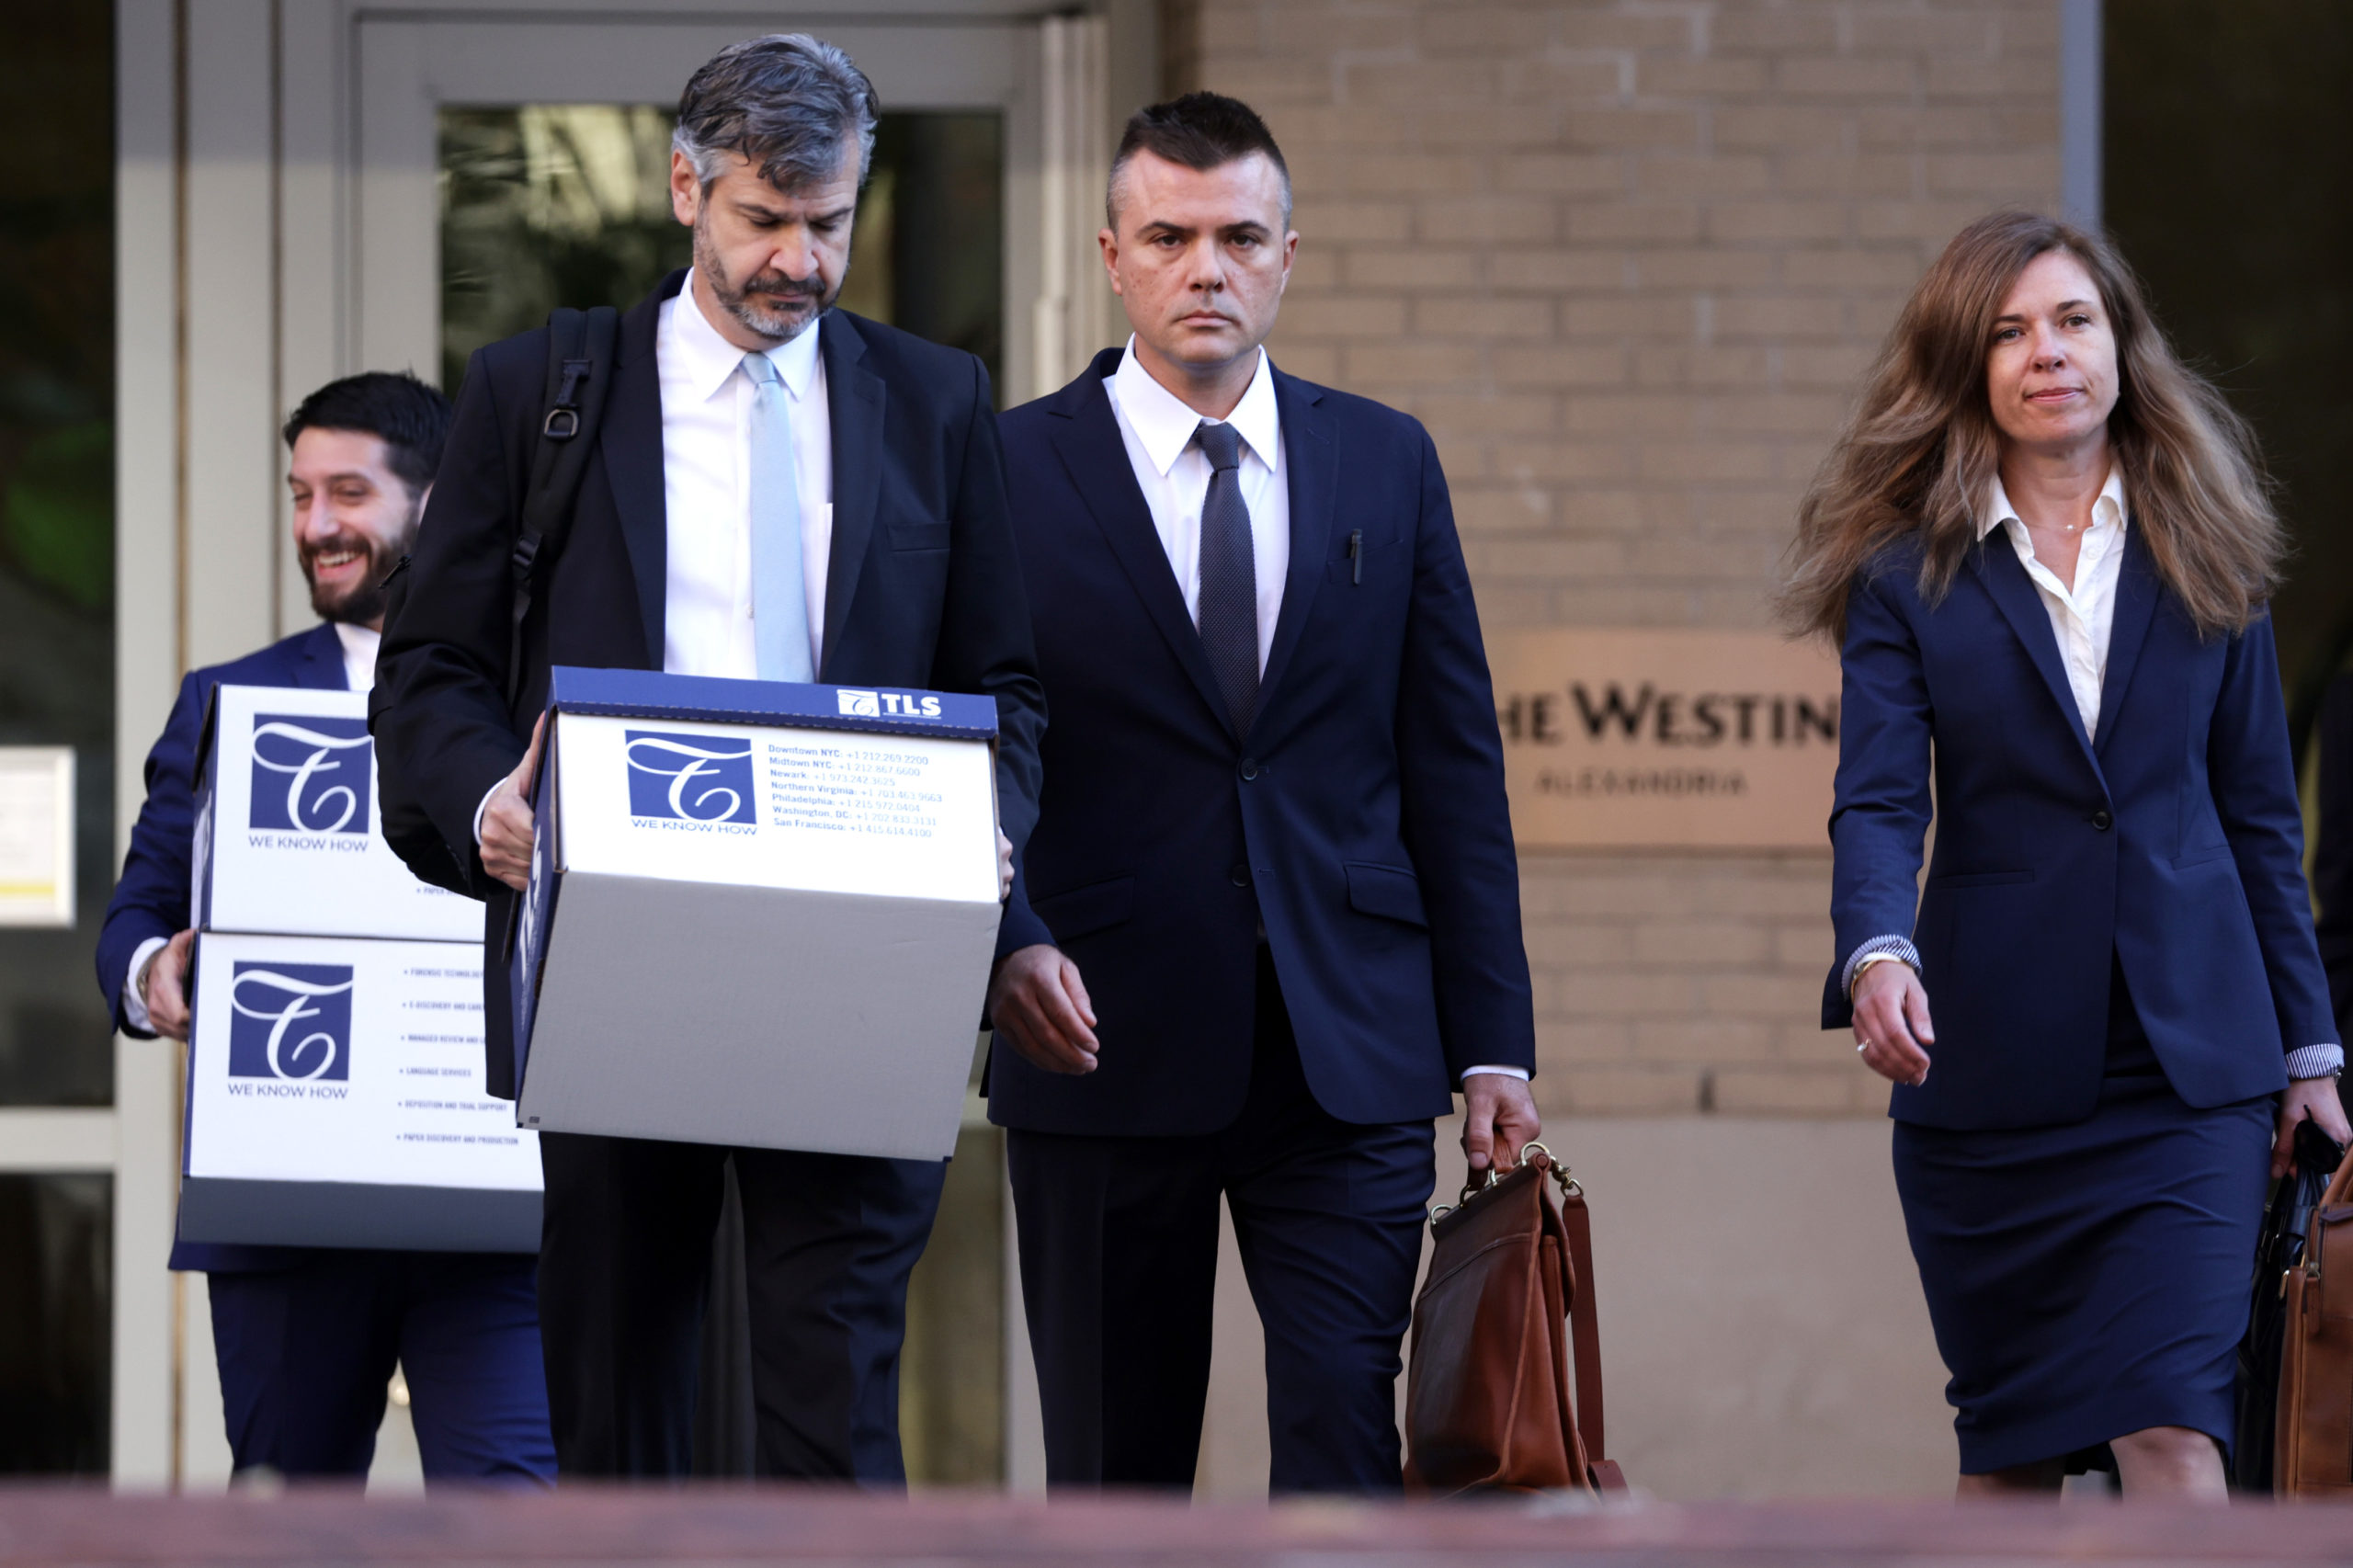 ALEXANDRIA, VIRGINIA - OCTOBER 11: Russian analyst Igor Danchenko (C) arrives at the Albert V. Bryan U.S. Courthouse for his trial on October 11, 2022 in Alexandria, Virginia. Danchenko faces five counts of lying to the FBI over his sources as to claims made in the “Christopher Steele Dossier” as part of the investigation of Special Counsel John Durham into the origins of the FBI probe of alleged collusion between Russia and the 2016 Trump presidential campaign. (Photo by Alex Wong/Getty Images)